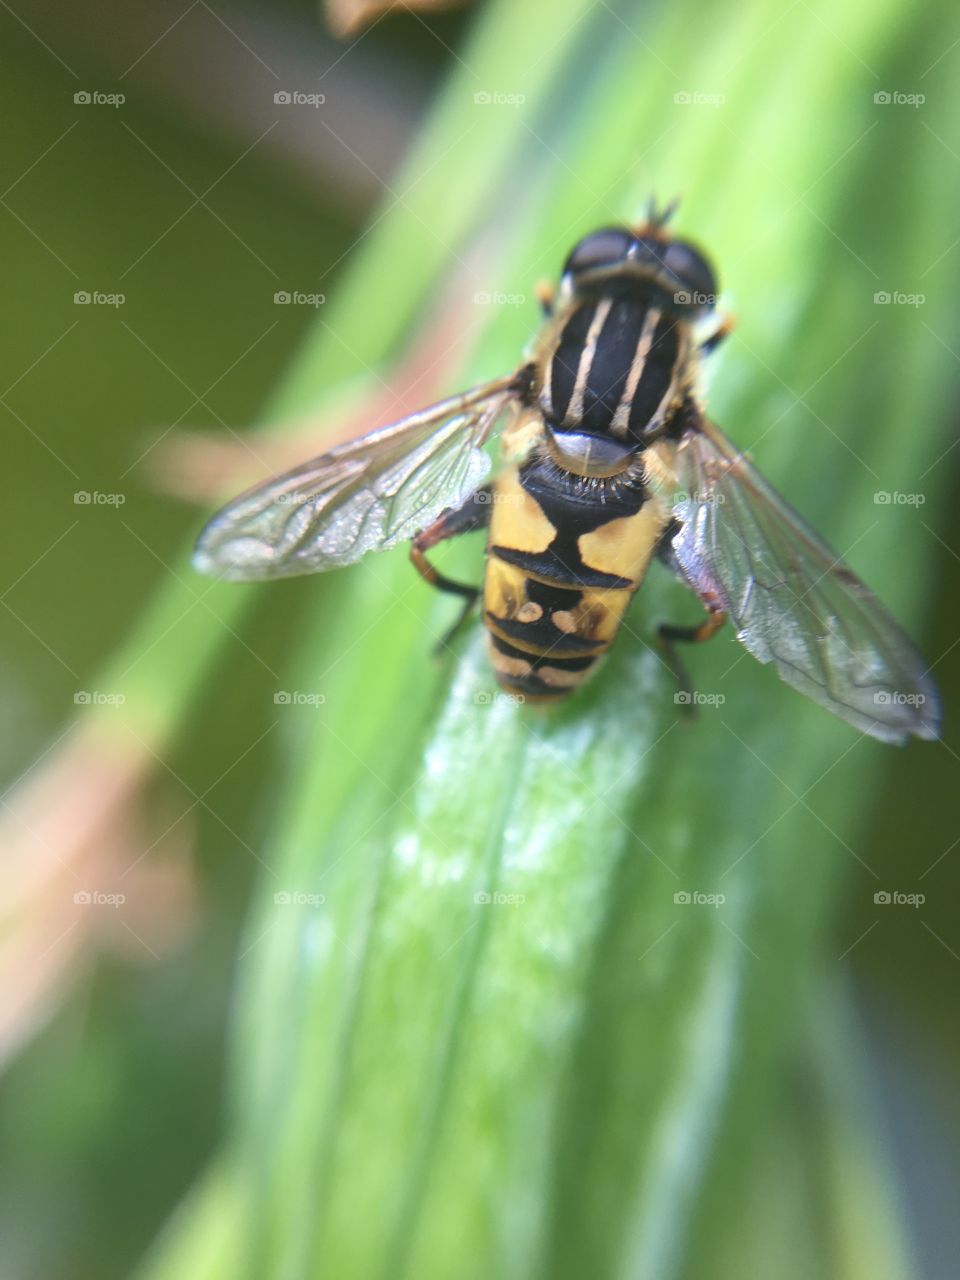 Hover fly life 2